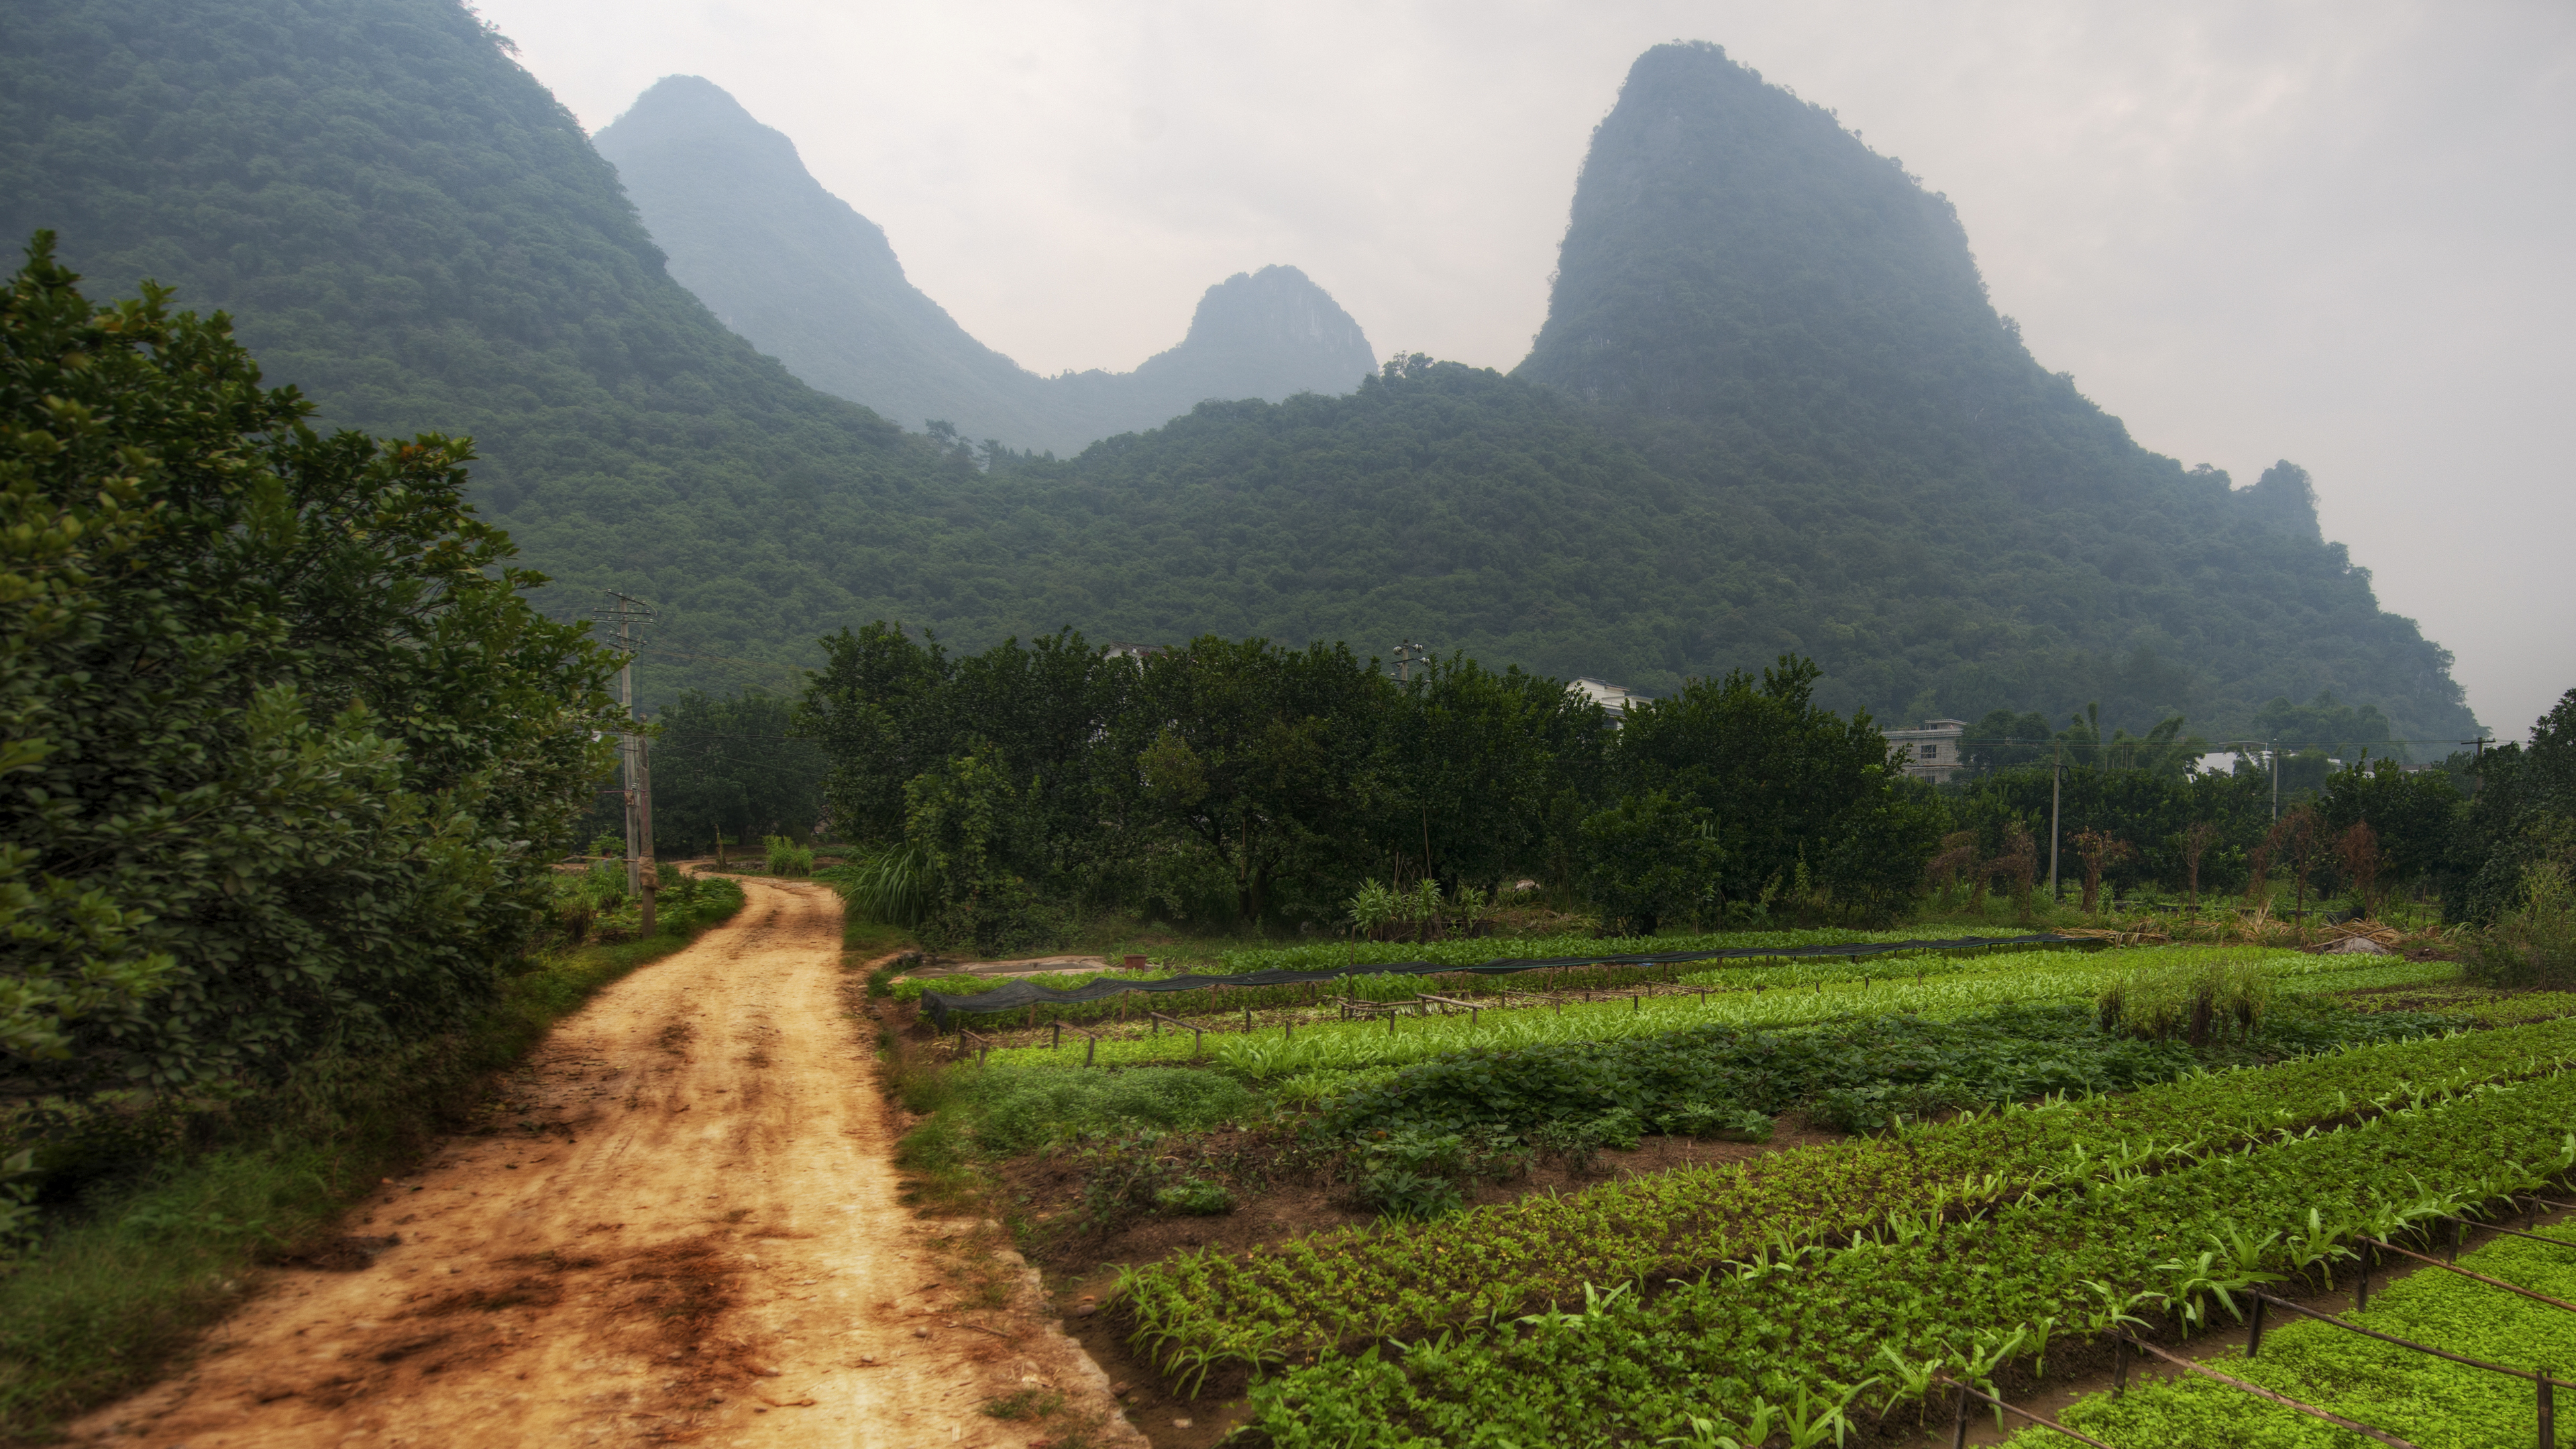 General 3840x2160 China photography Trey Ratcliff path nature mountains trees hills garden mist